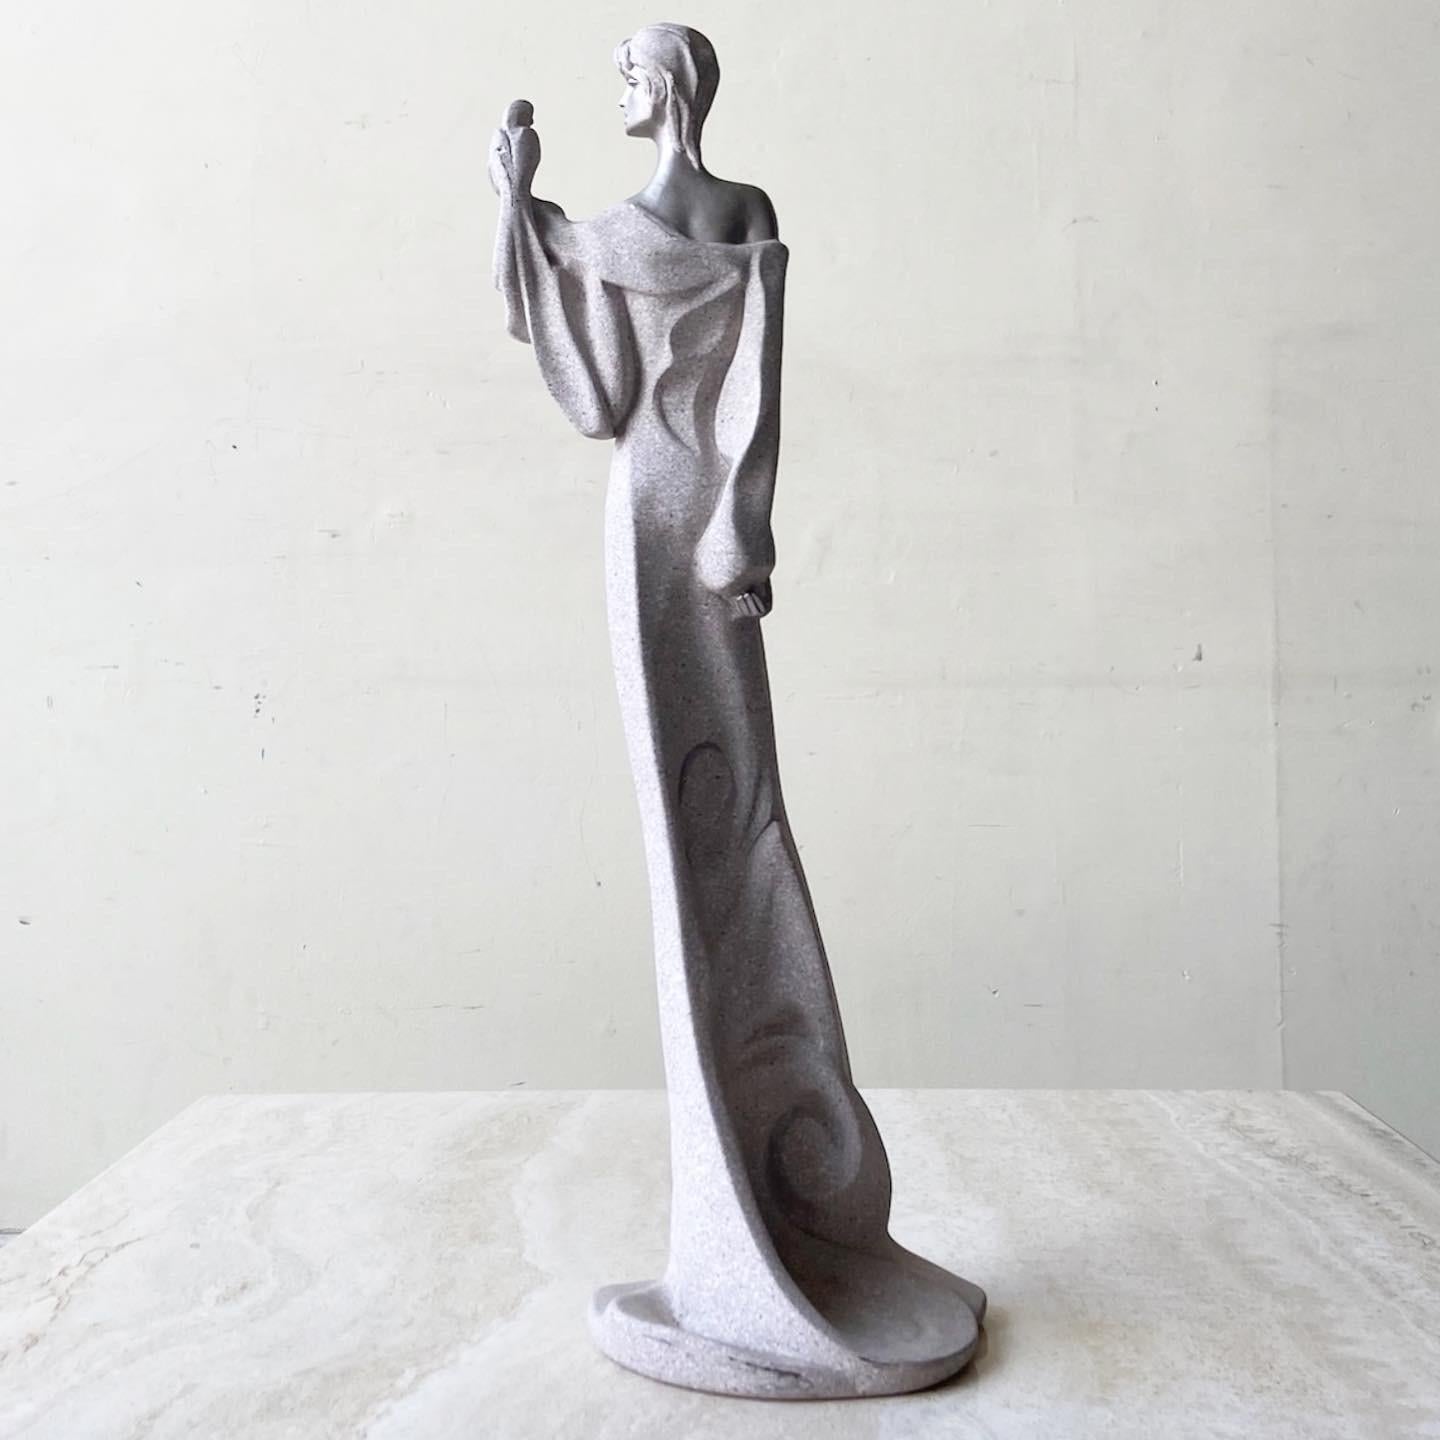 Exceptional postmodern silver plaster sculpture. Displays a woman with her parrot.
   